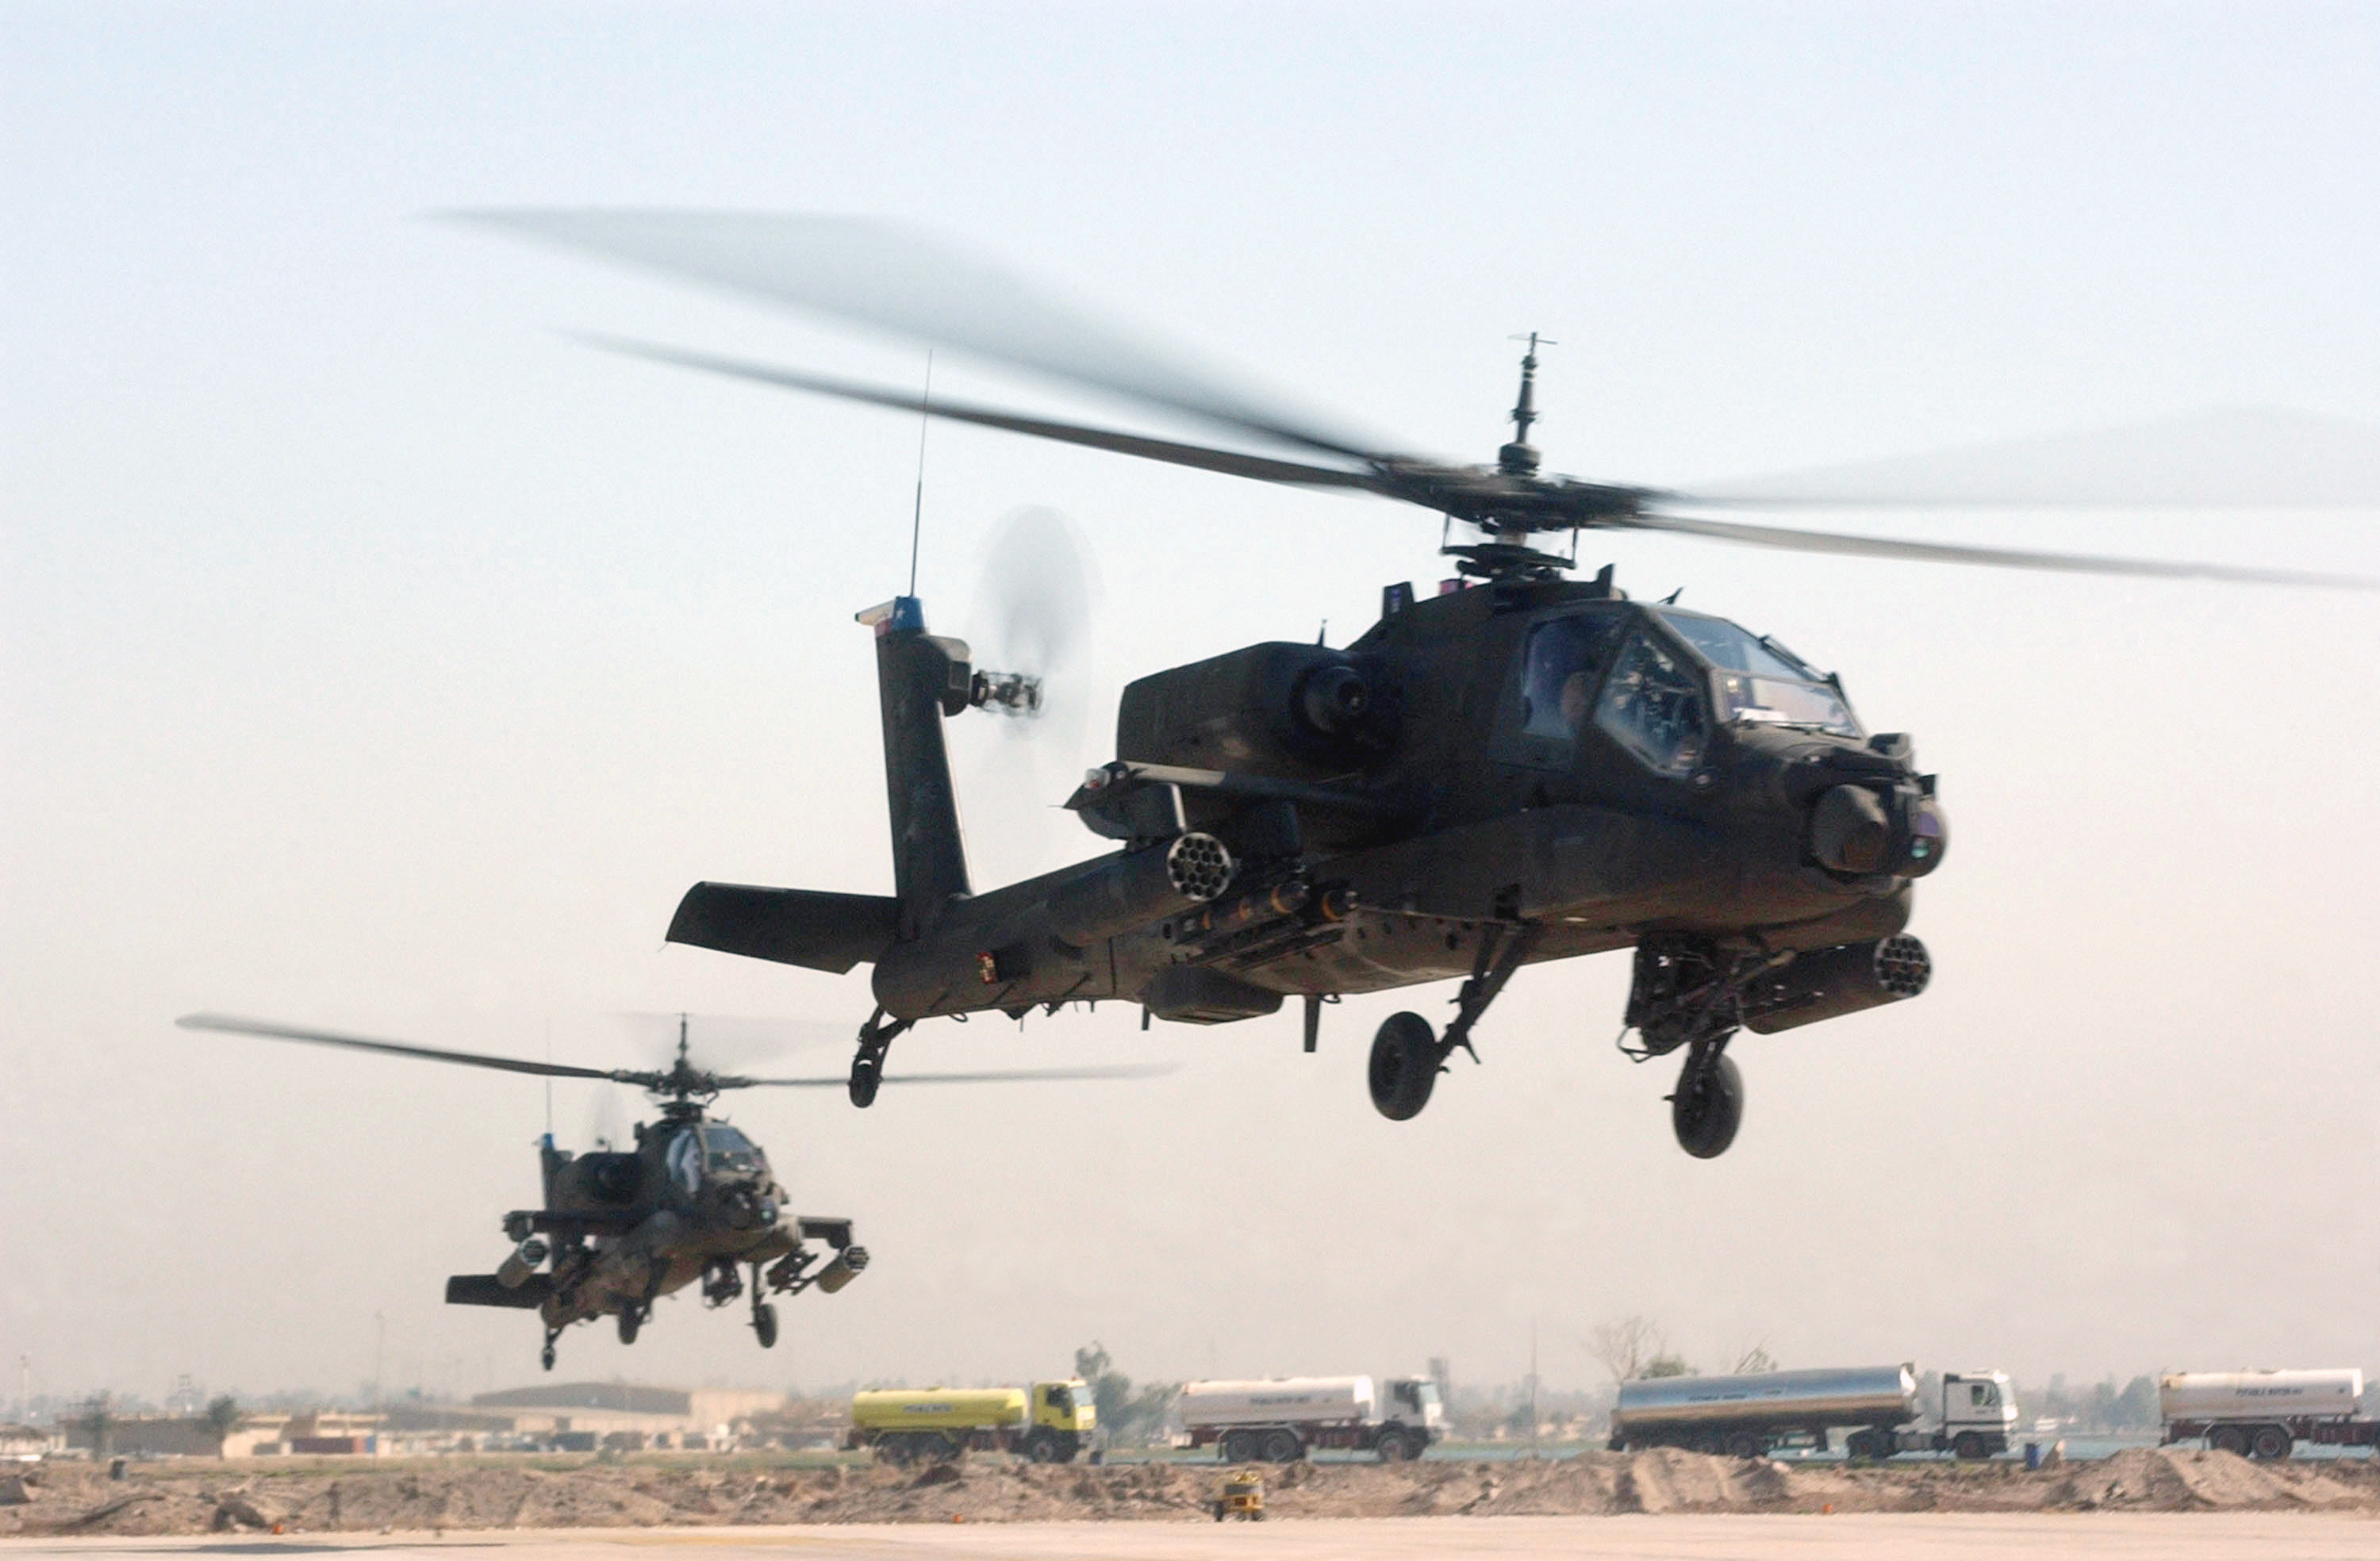 Ah Apache Us Army Attack Helicopter Helicopters